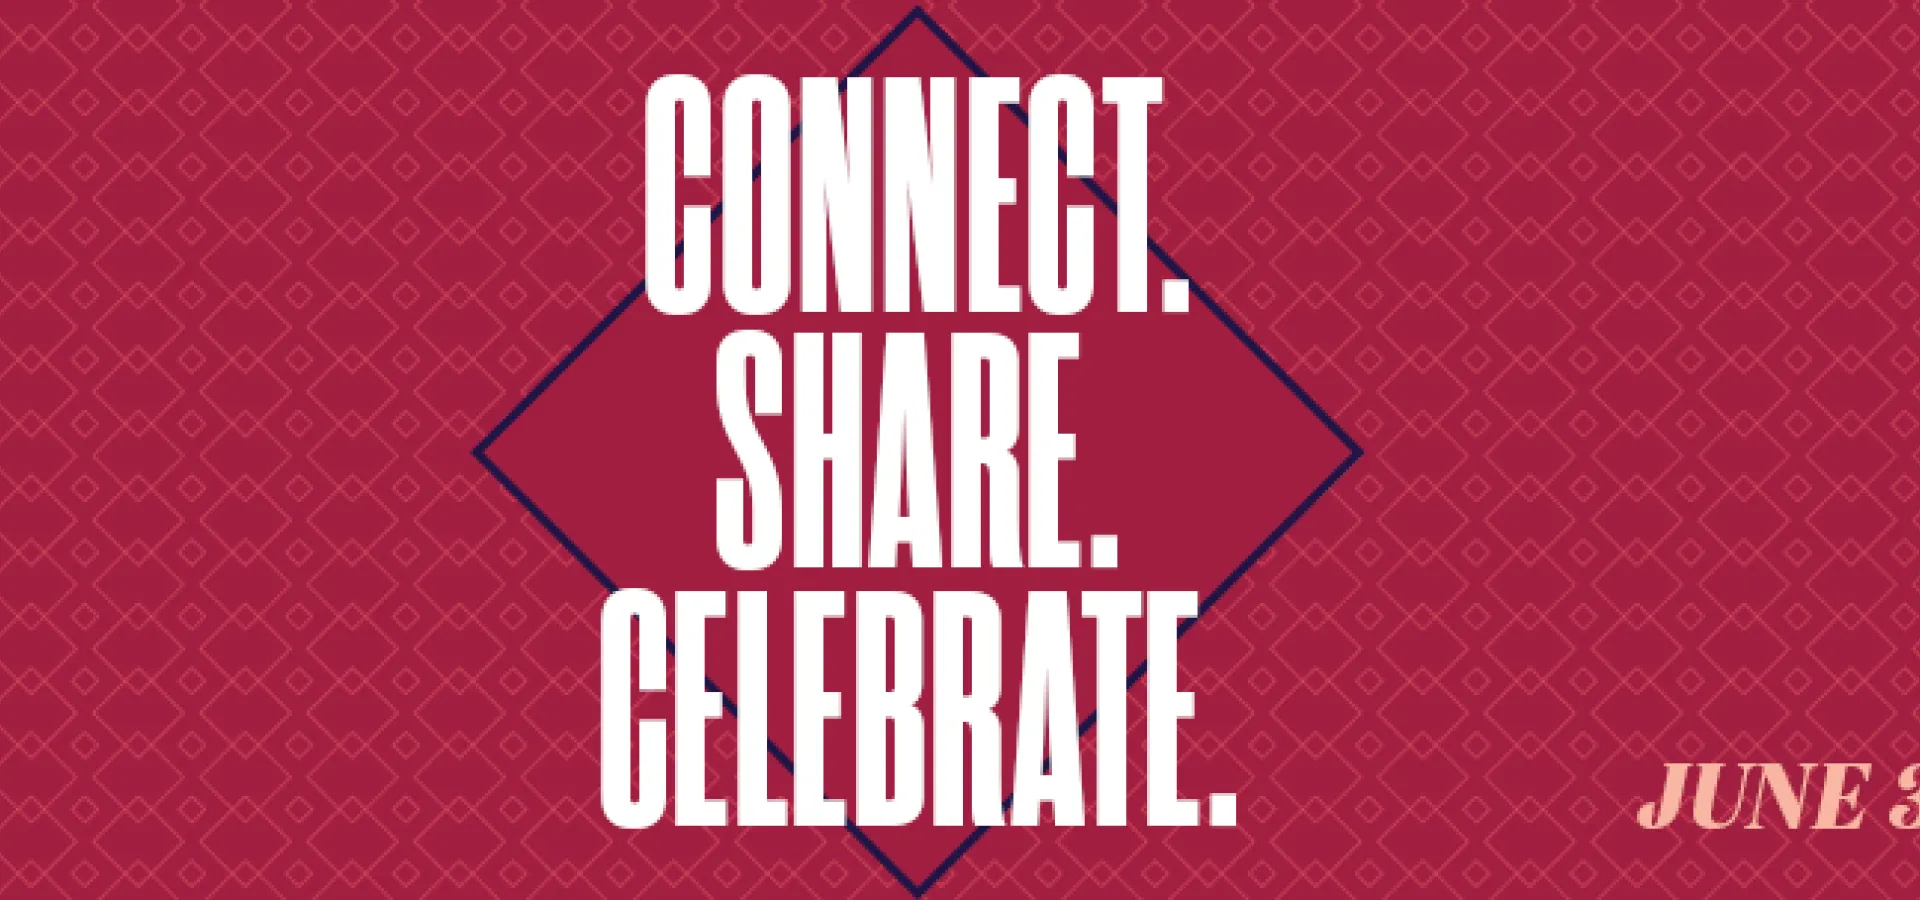 Connect. Share. Celebrate. June 3-6, 2021.